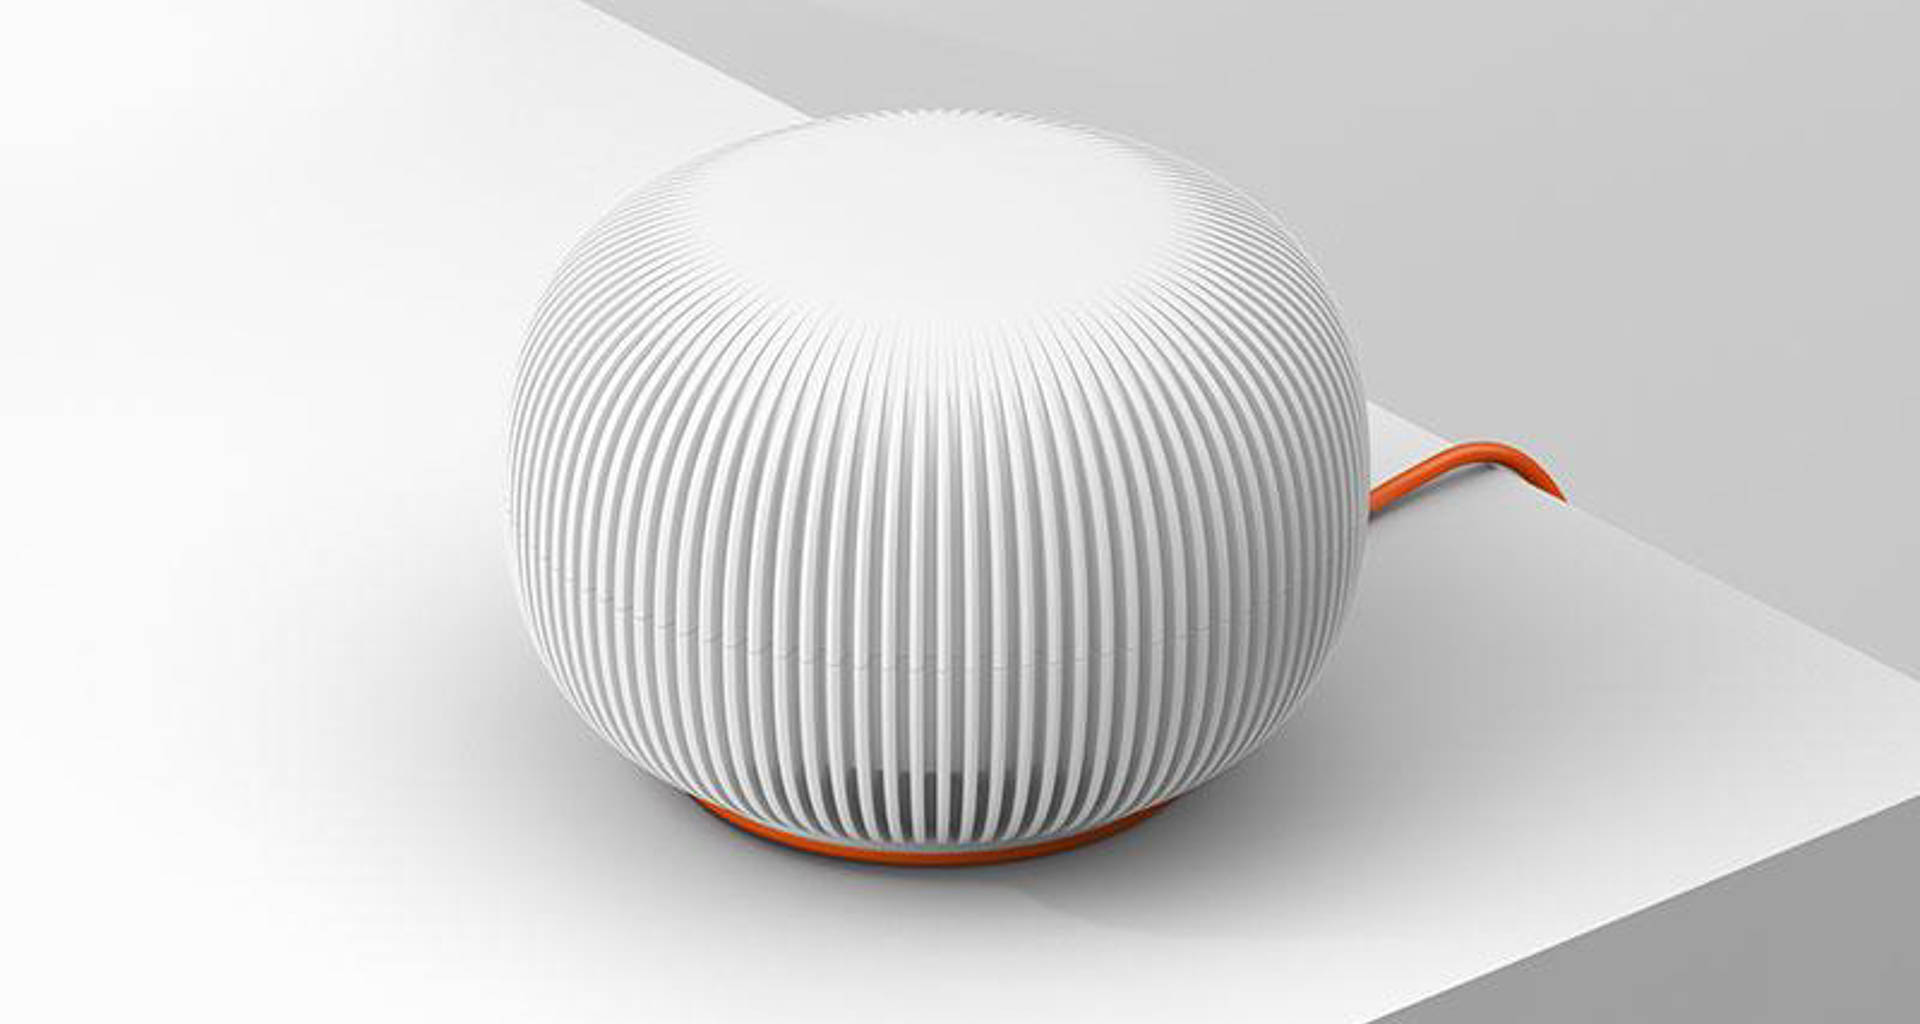 Hedgehog is designed to sit out in the open in your home and connects to the router. Image: Zobi Ltd./Hedgehog.